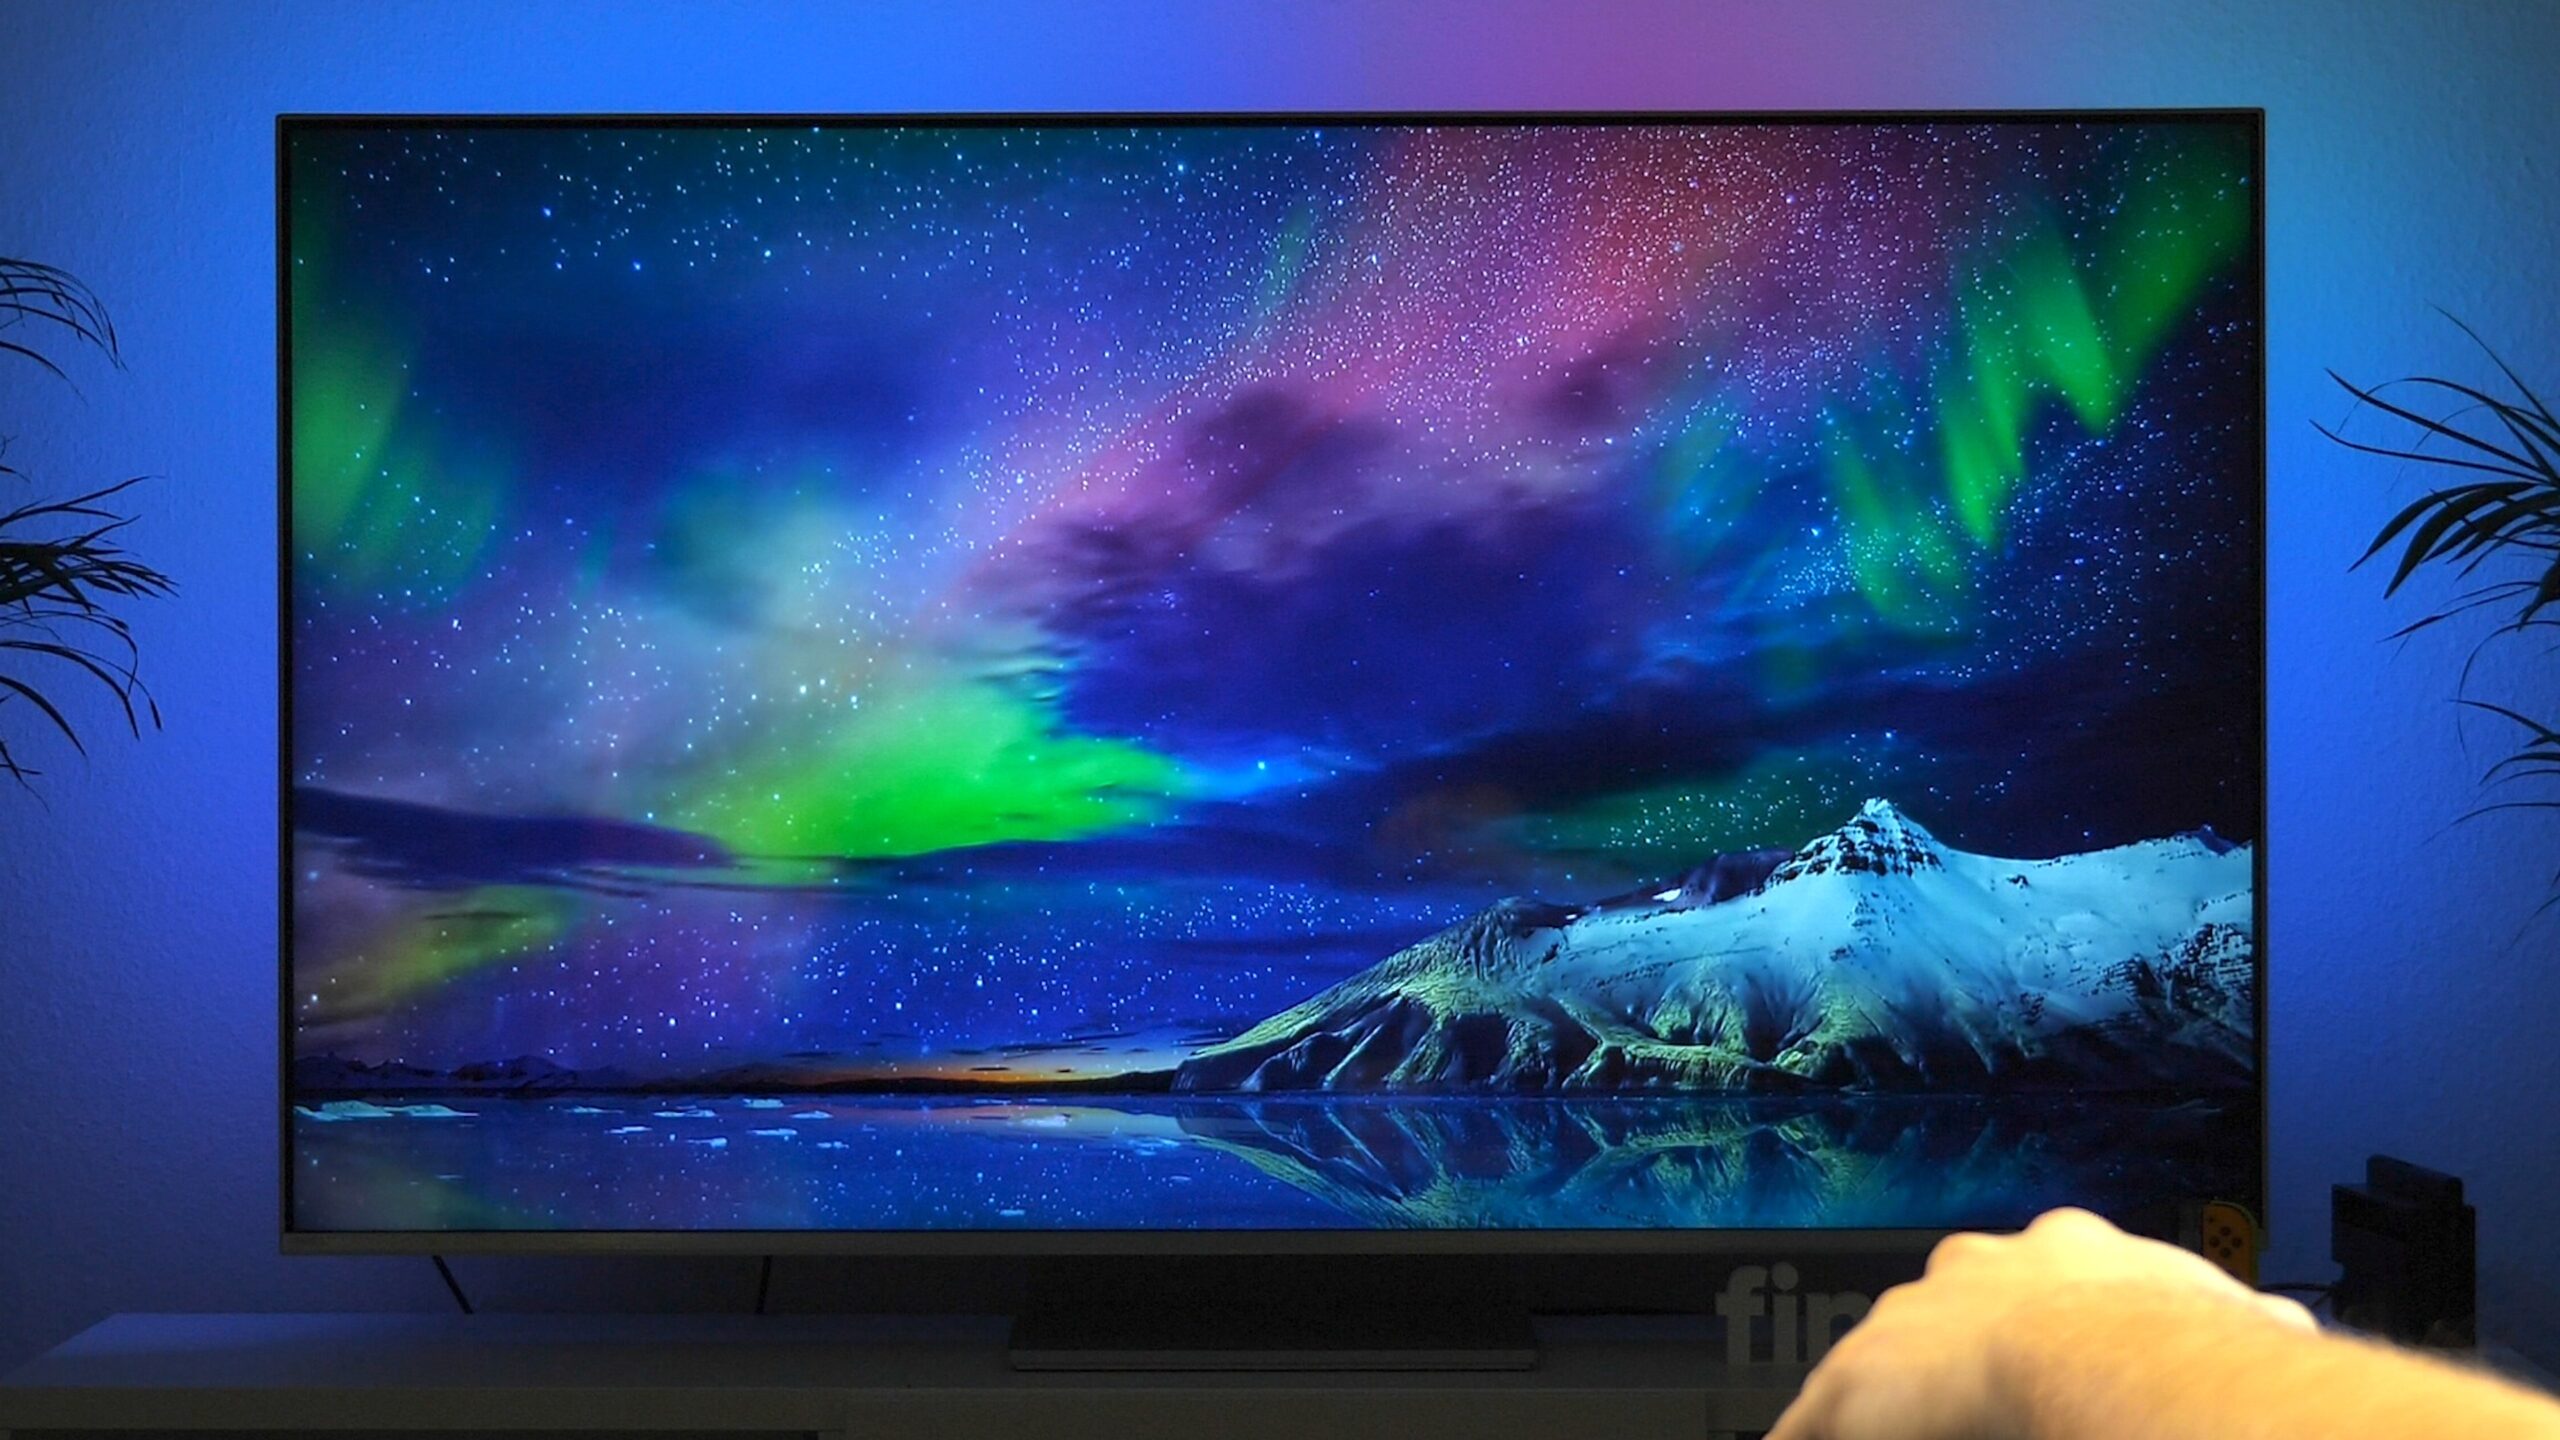 The One - Ambilight TV